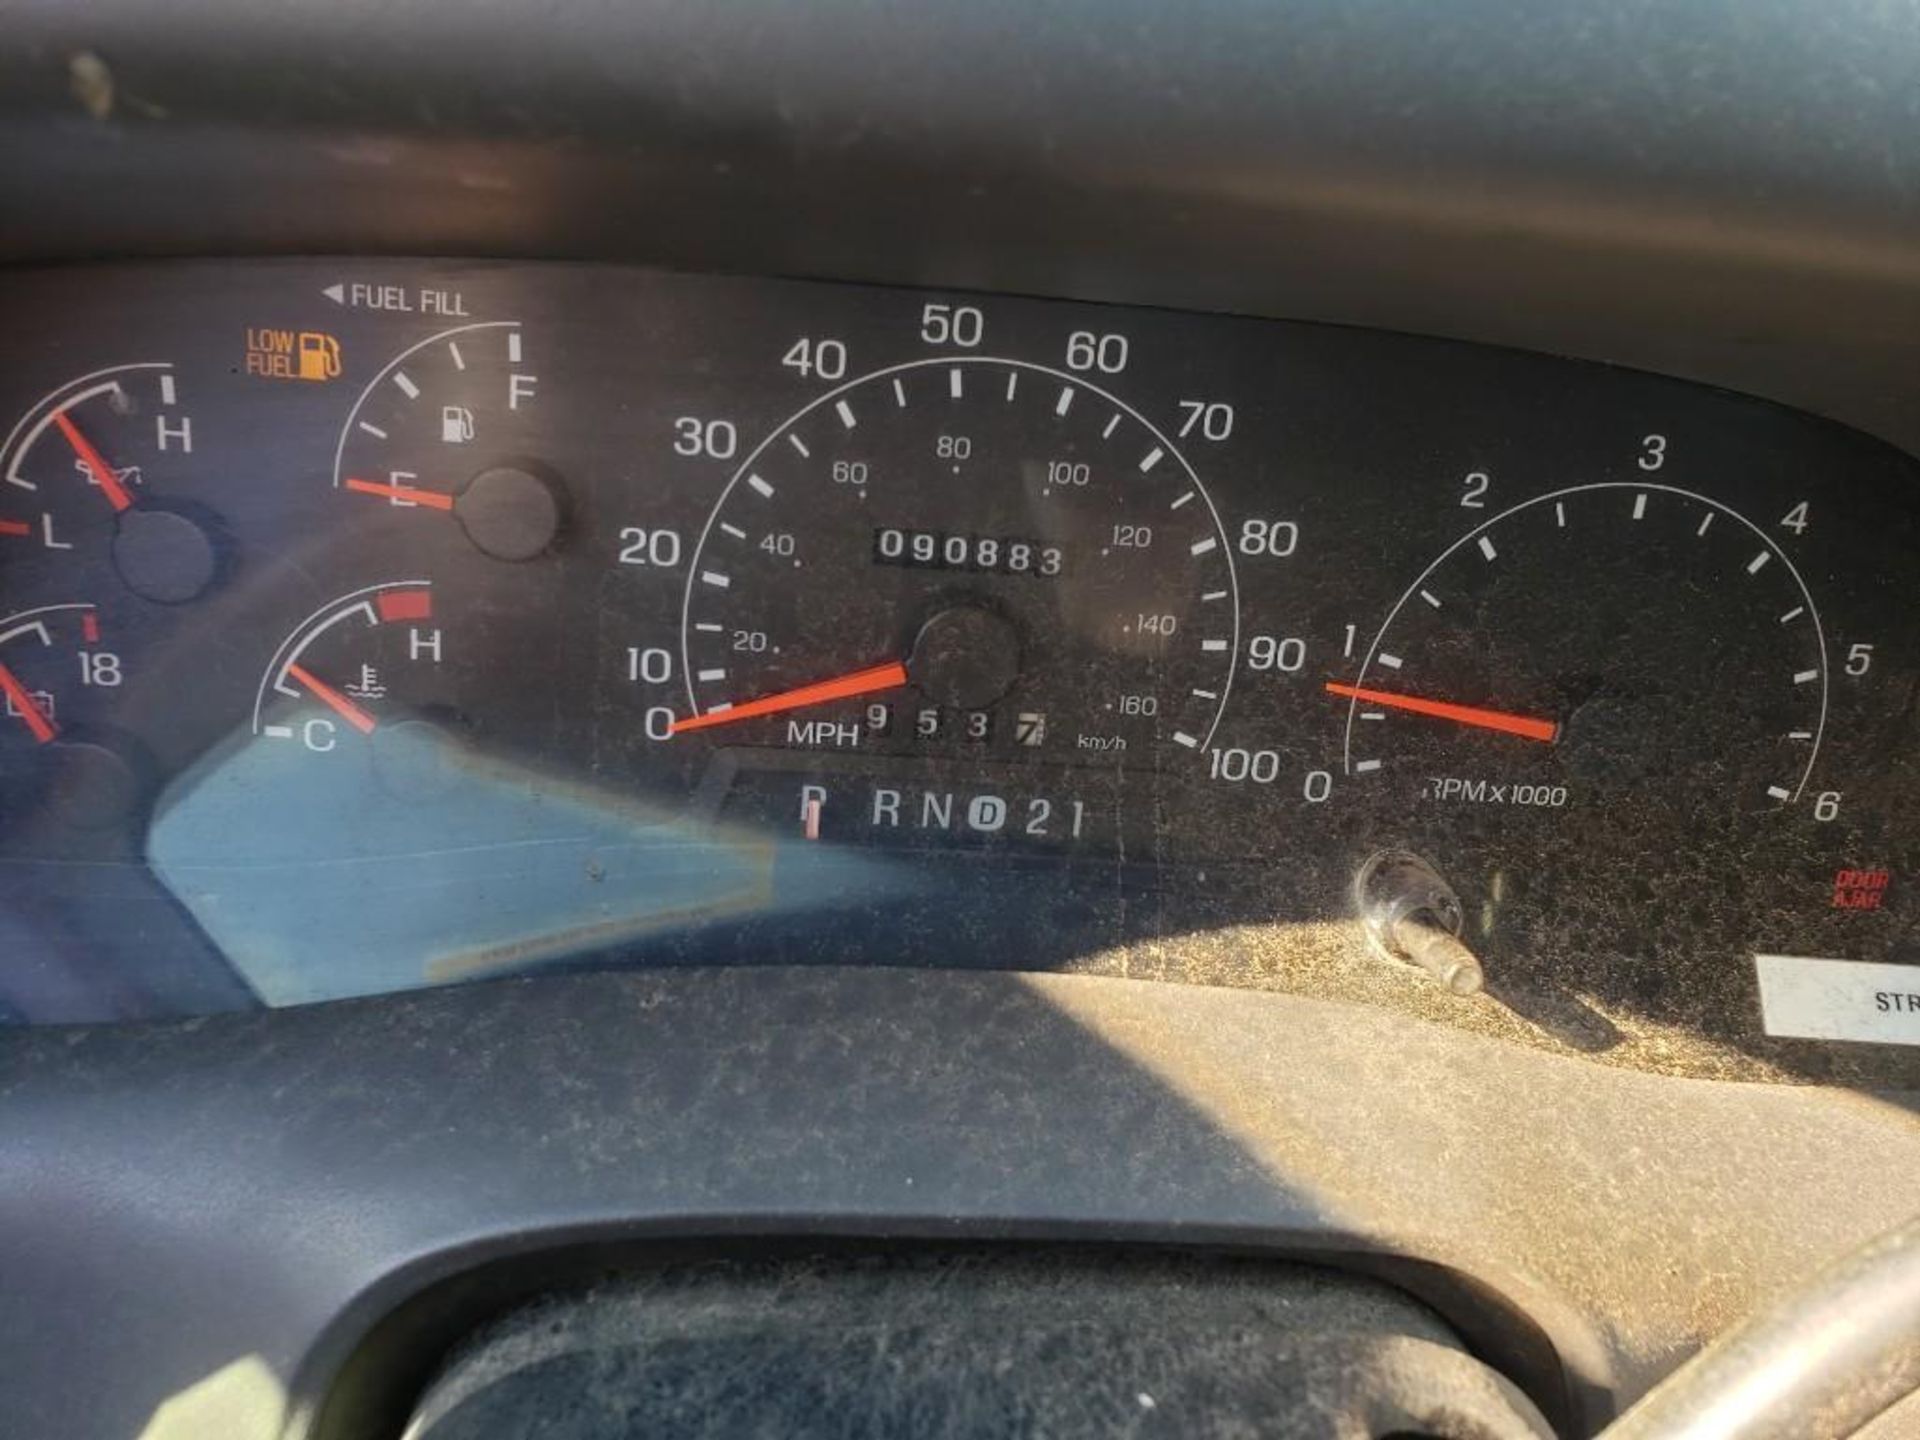 2000 Ford F250. VIN 1FTNX20L9YED73480. 5.4L V8. 2wd. 90,883 miles showing on odometer. - Image 19 of 27